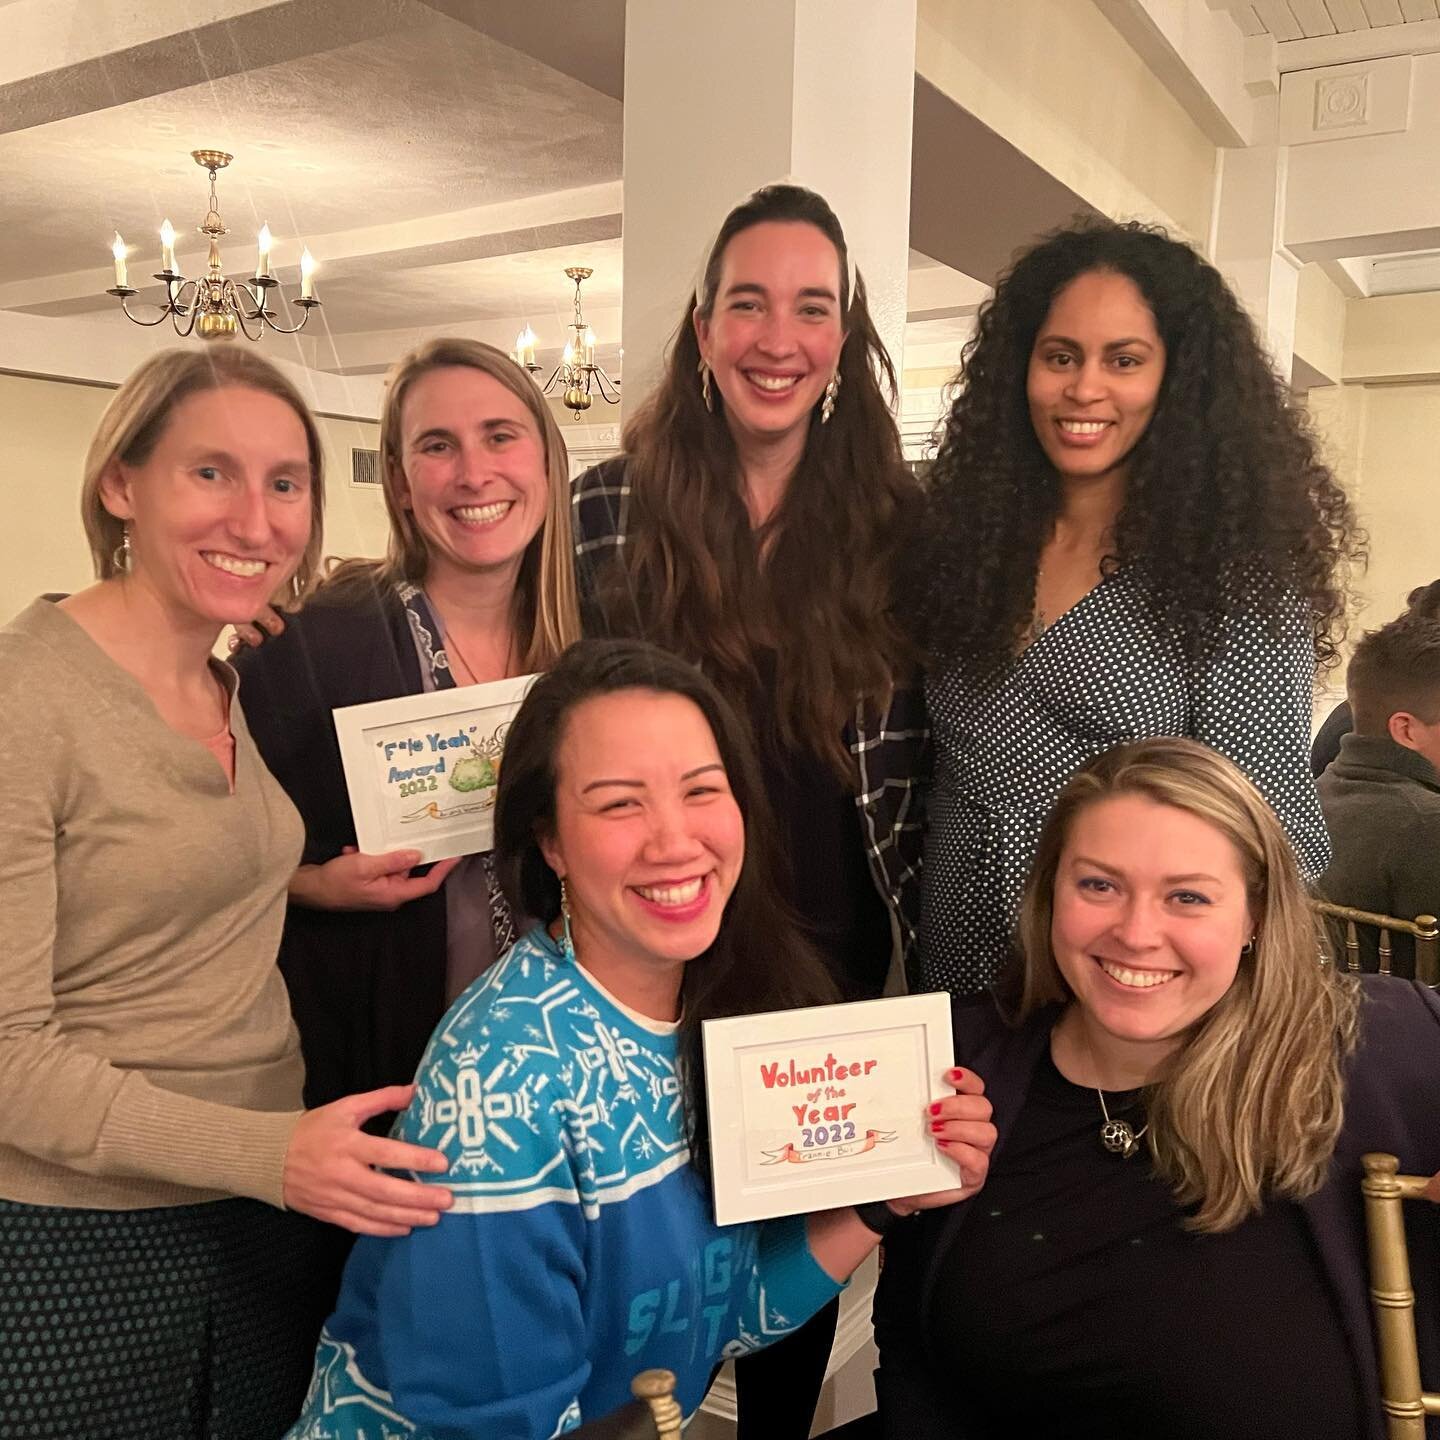 Friday night was the AMC Boston Mountaineering Committee Annual Holiday Party and our very own Fannie @skyesplash was unanimously awarded the Scott Sandburg Volunteer of the Year Award because of her dedication to building a safer, more inclusive, mo